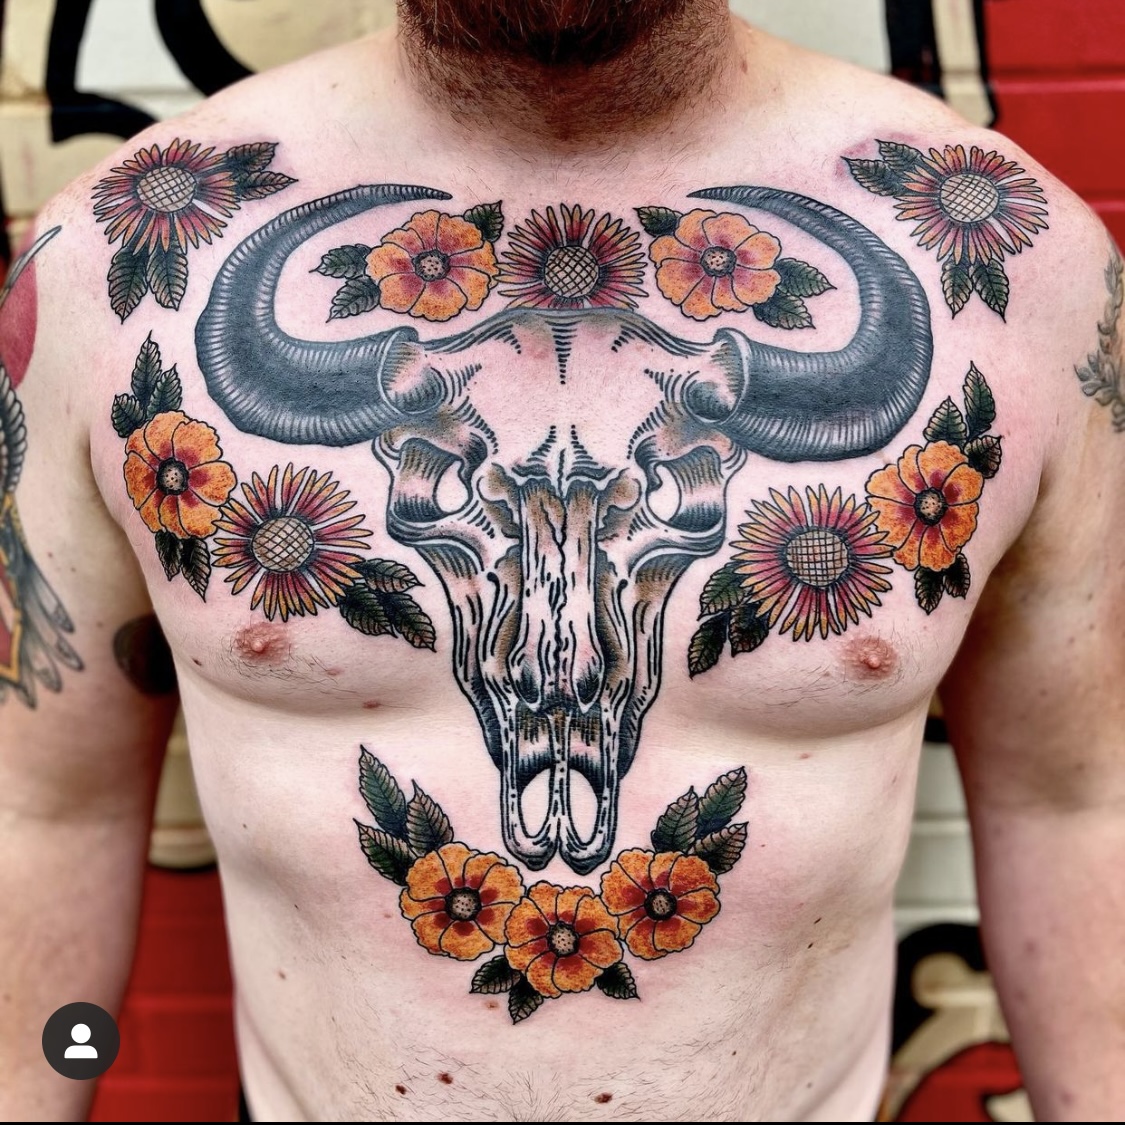 Large chest tattoo from best tattoo shops in dallas tx